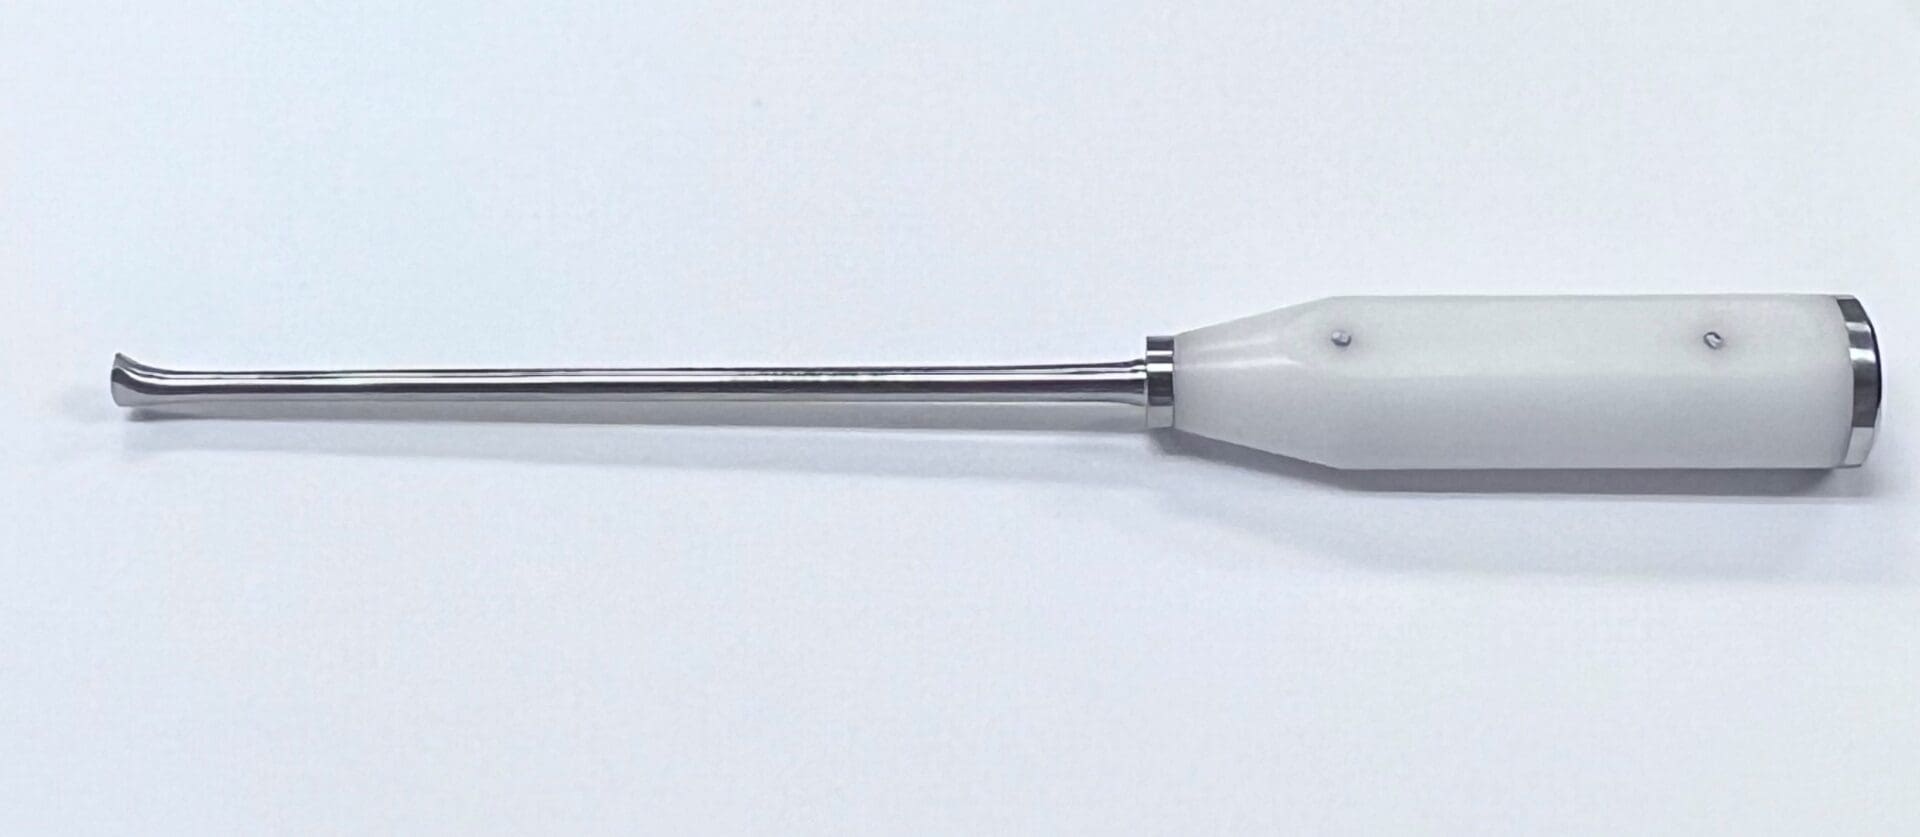 A MORELAND TYPE ACETABULAR PUNCH plastic tube on a white surface.